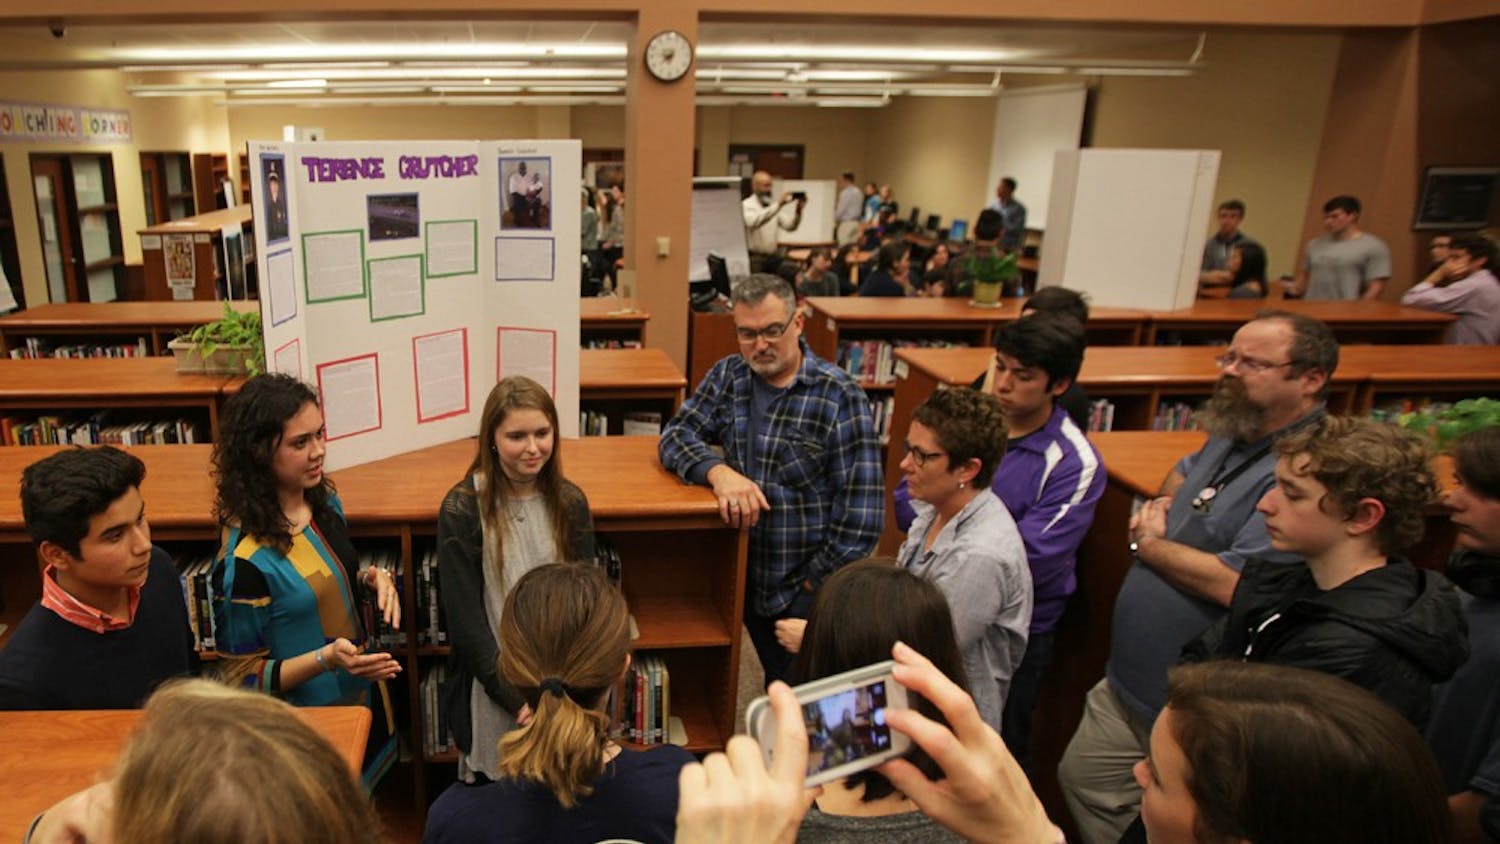 Carrboro High School students (from left) Amado Ruiz-Perez, Sophie Therber and Lily Ervin, give a presentation on Terence Crutcher, one of many victims of recent police shootings Tuesday evening.  